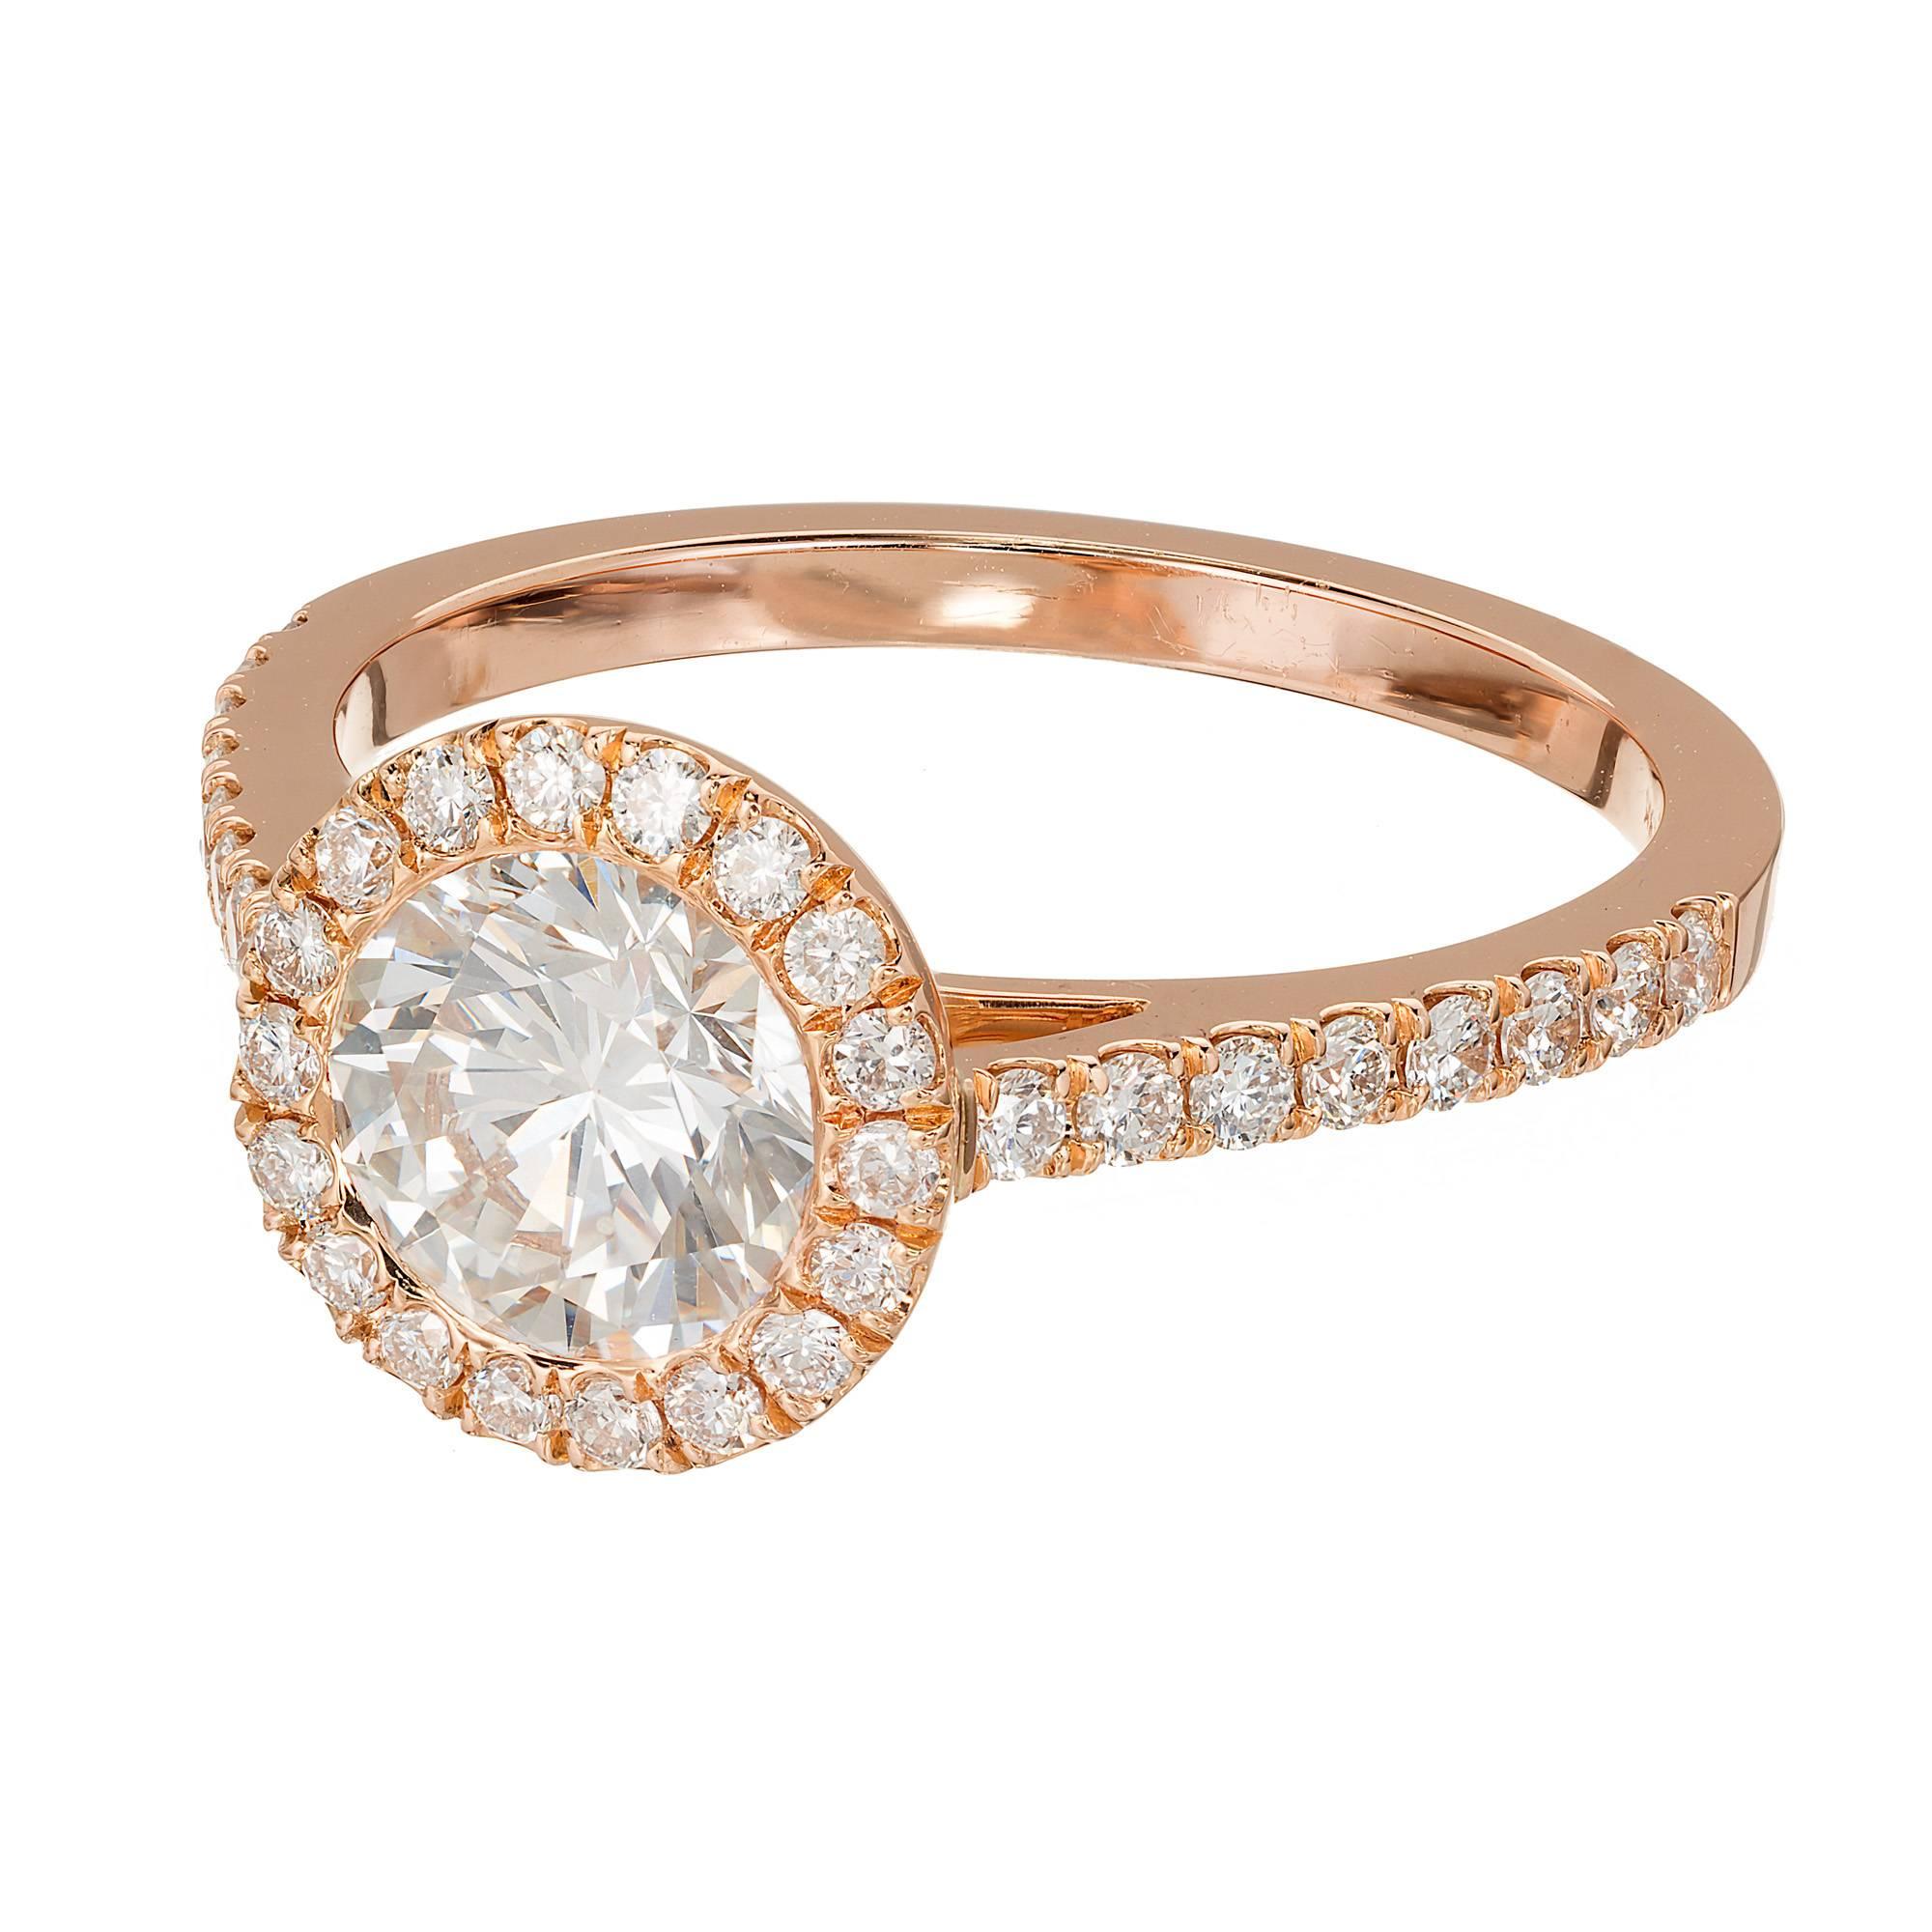 Peter Suchy Gia Certified 1.06 Carat Diamond Halo Rose Gold Engagement Ring For Sale 2